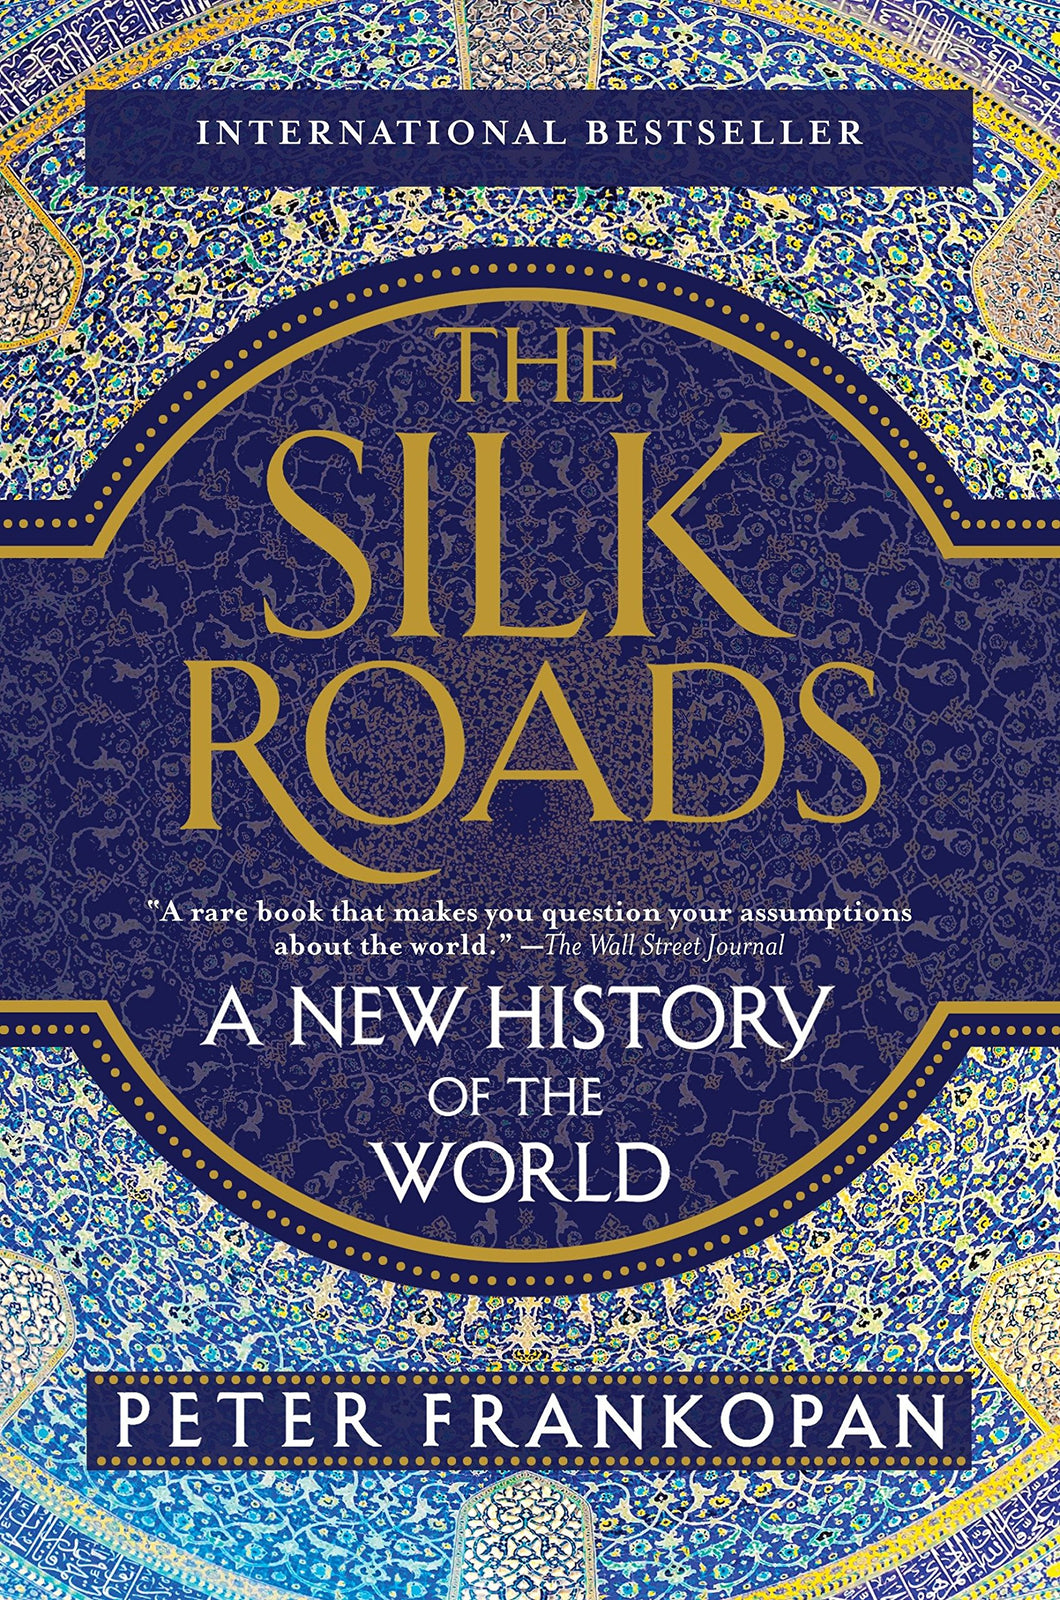 The Silk Roads: A New History of the World [Peter Frankopan]